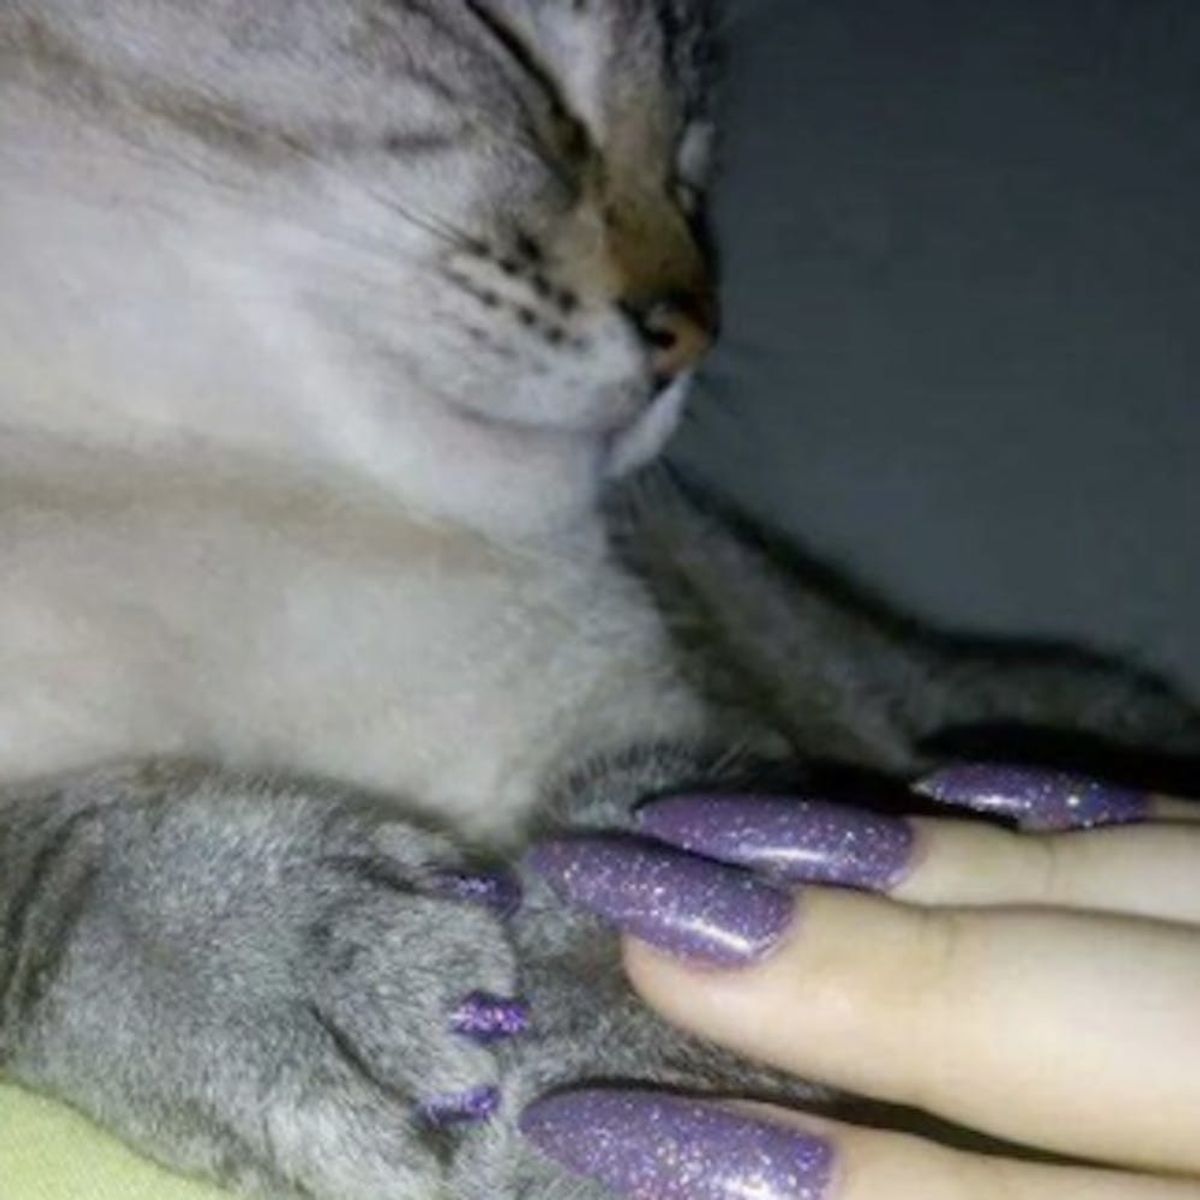 People Are Matching Their Manis to Their Pets’, Because Why Not?